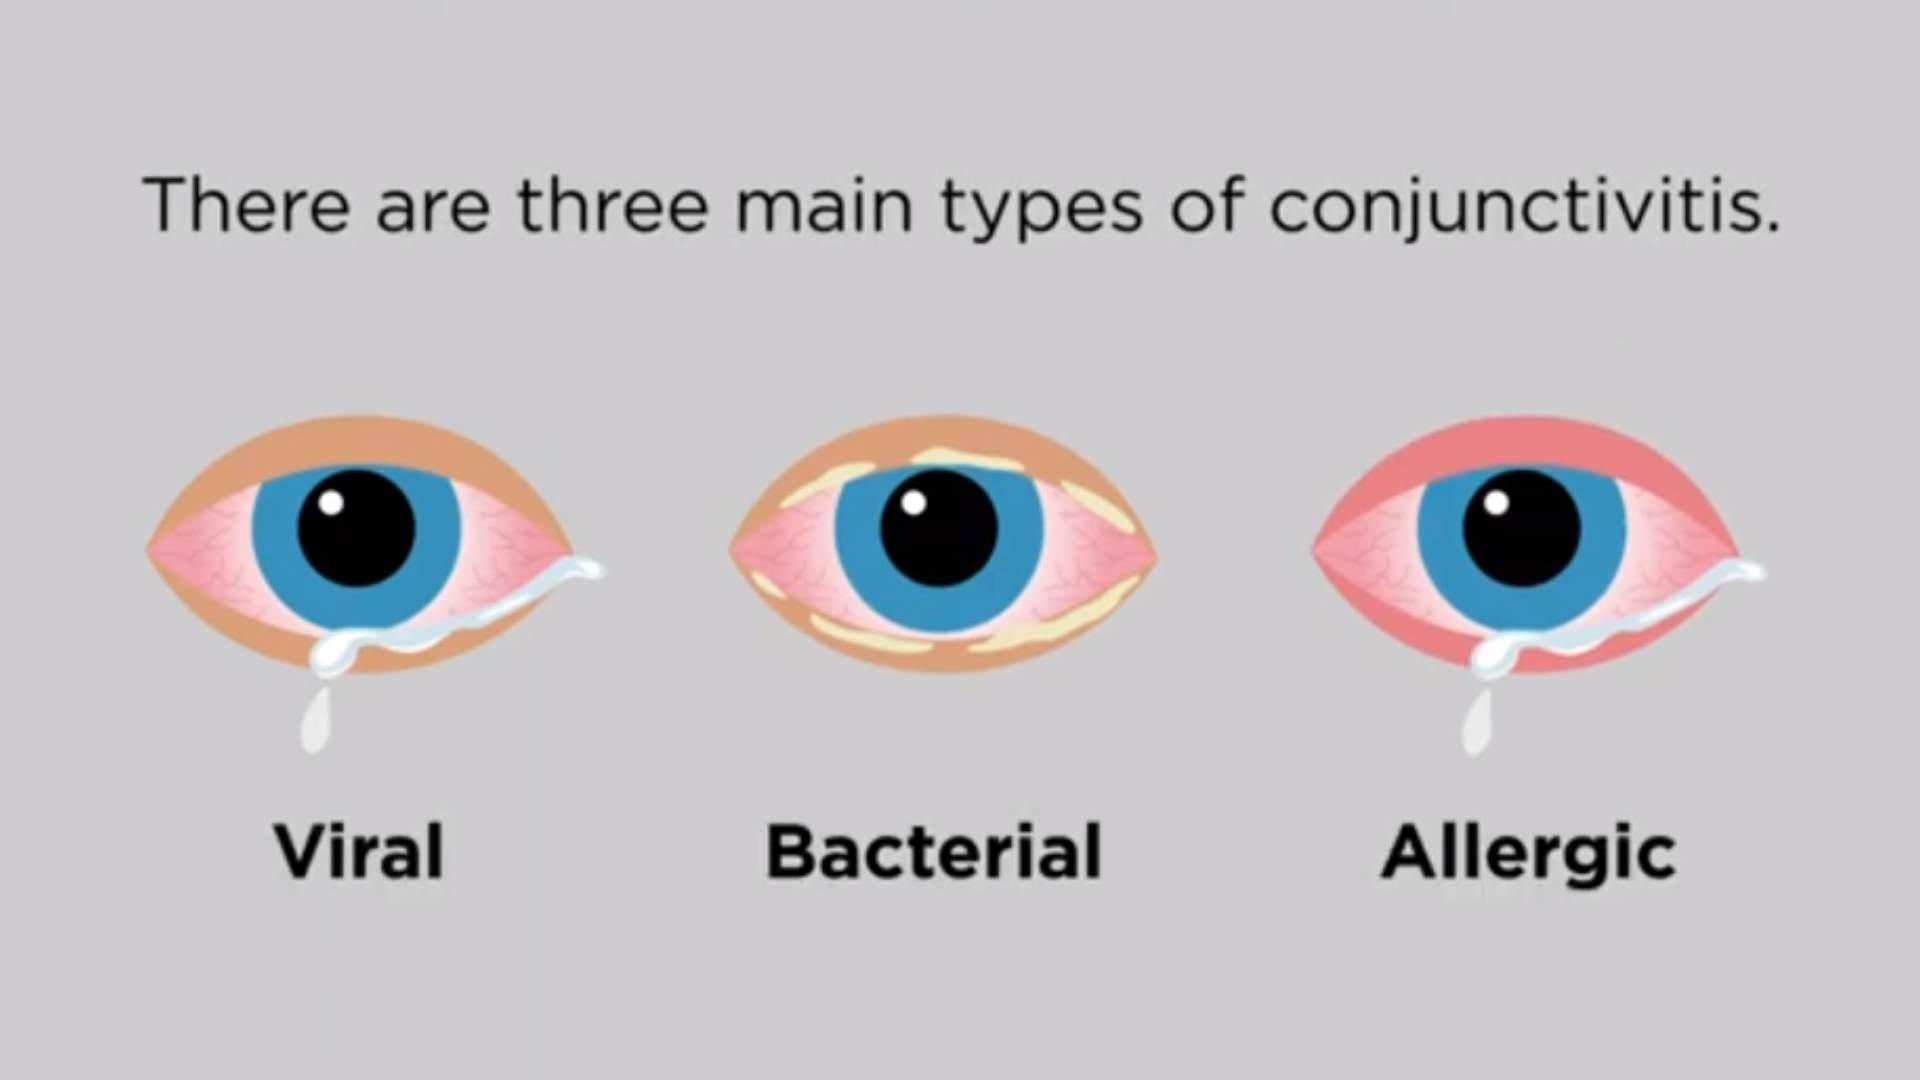 What are the main Types of Conjunctivitis?